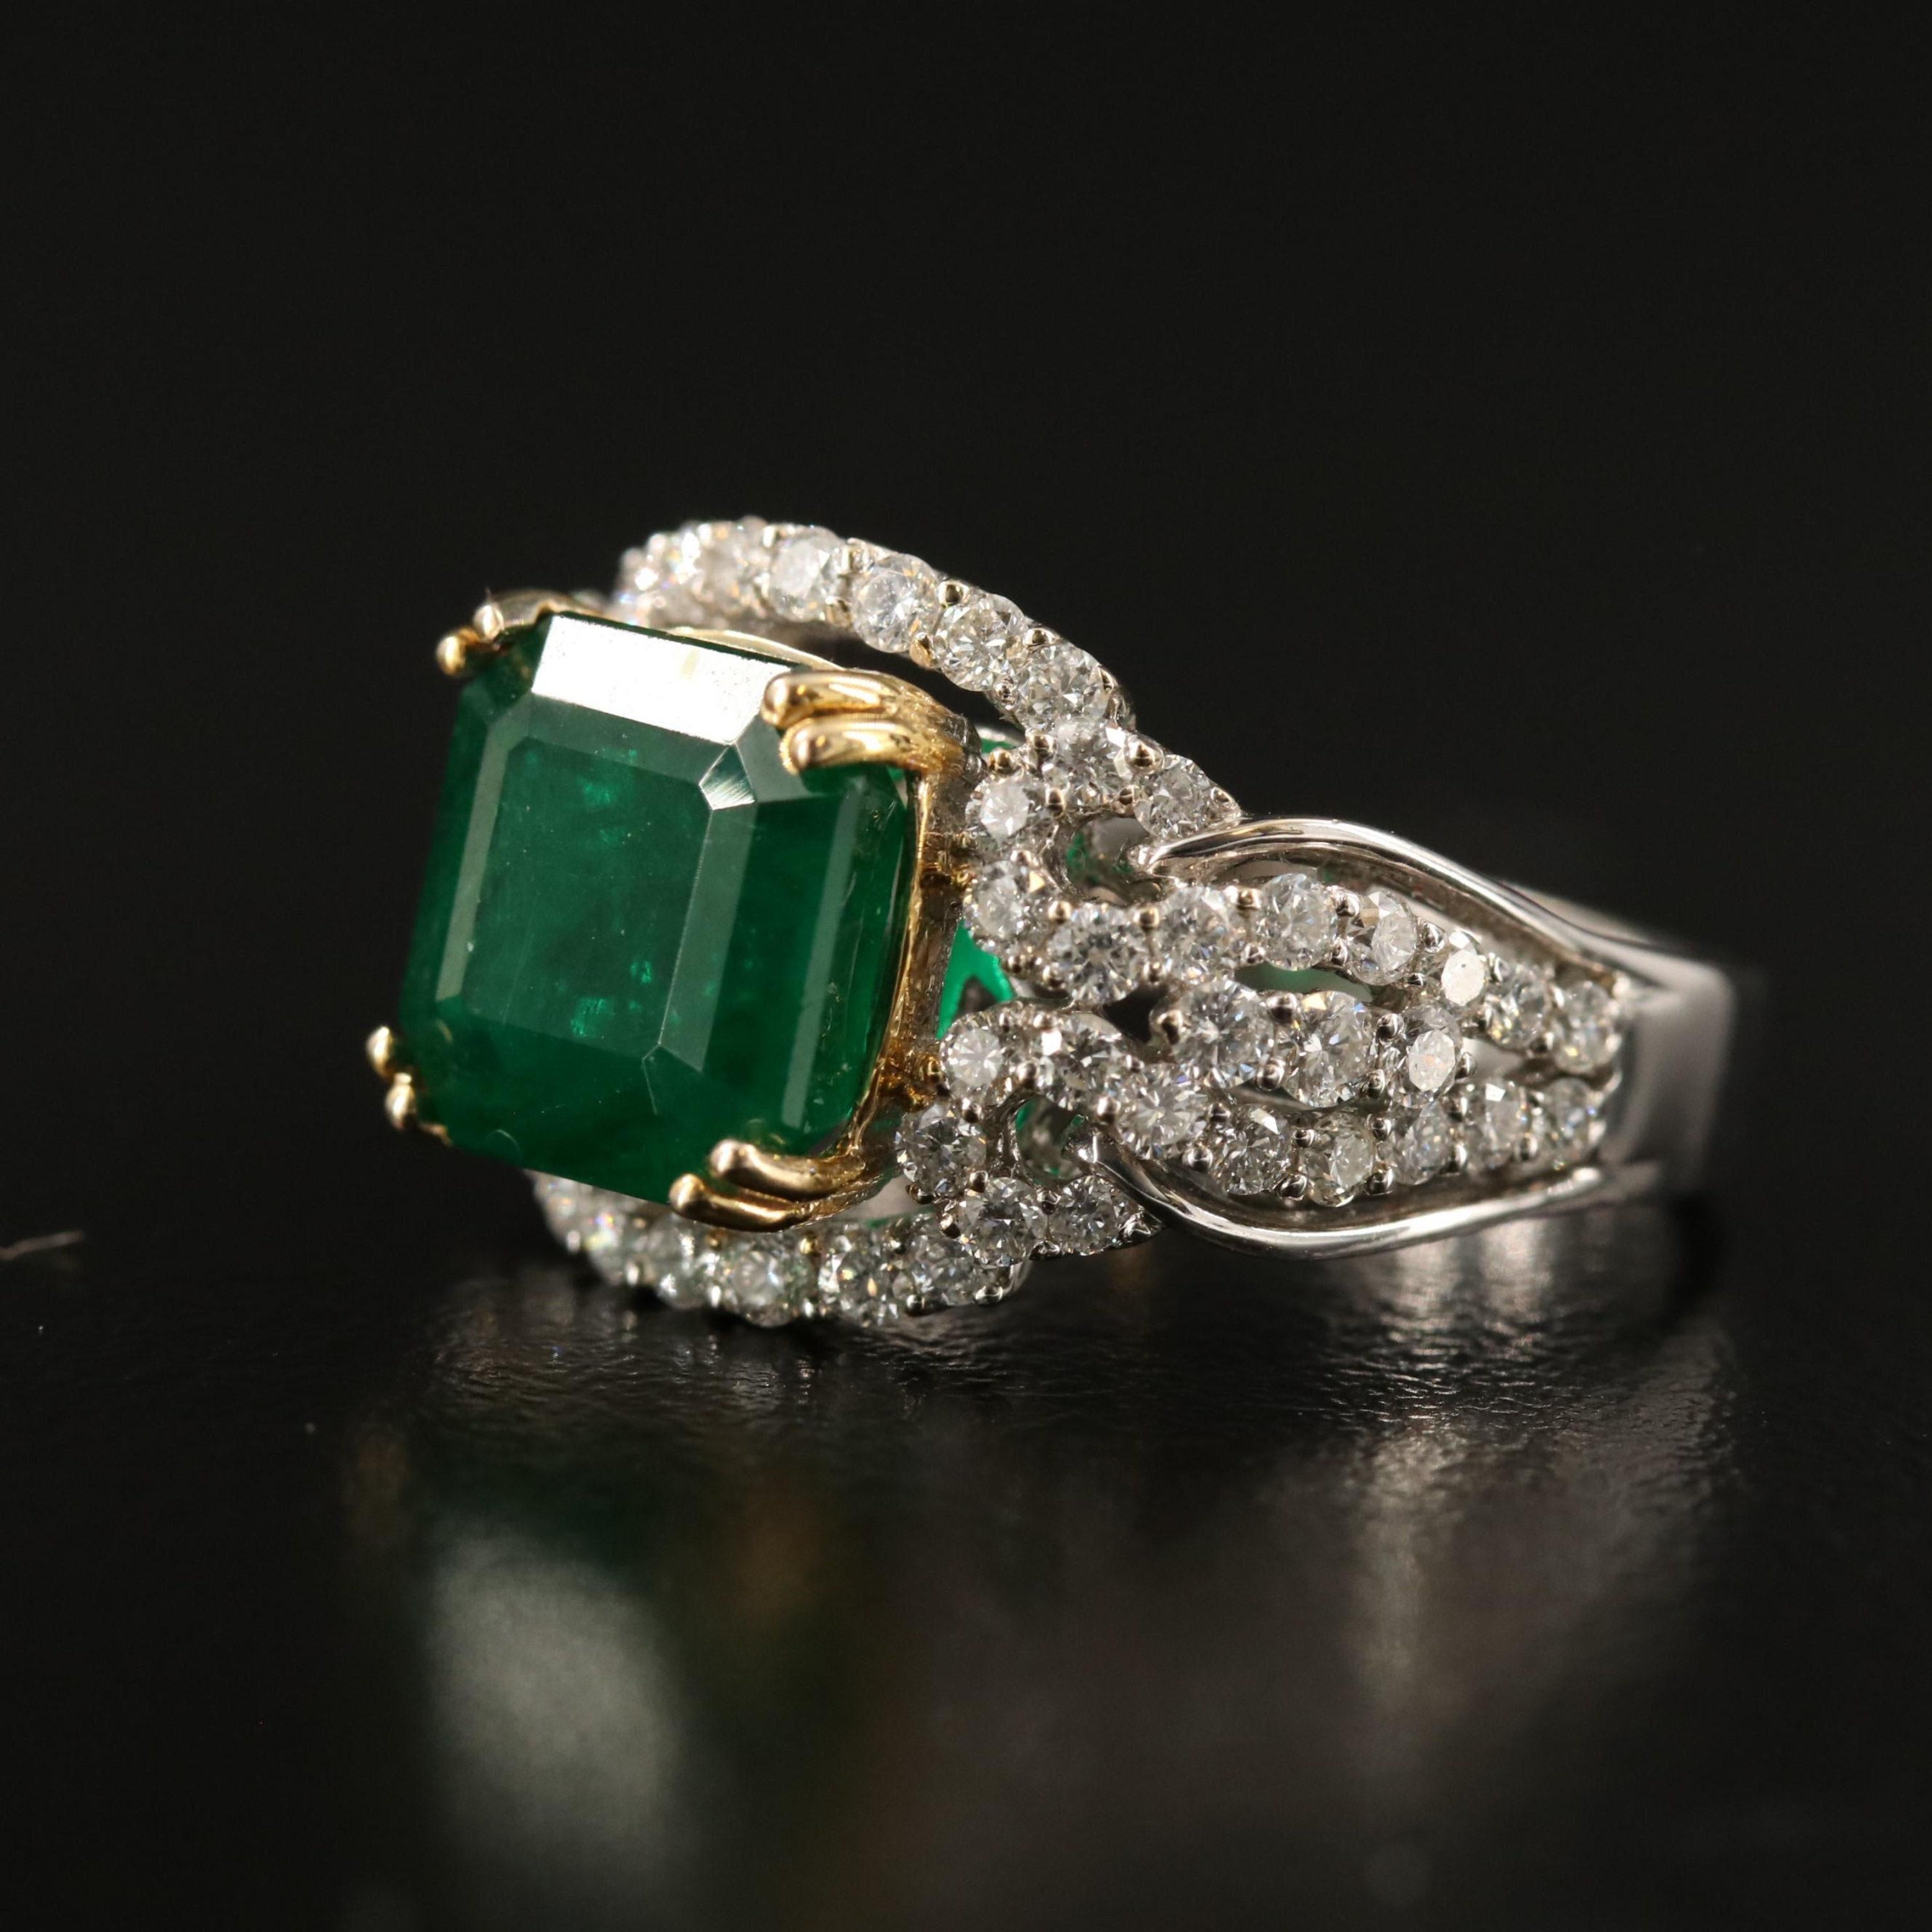 For Sale:  18K Gold 3.5 CT Natural Emerald Diamond Antique Art Deco Style Engagement Ring 2